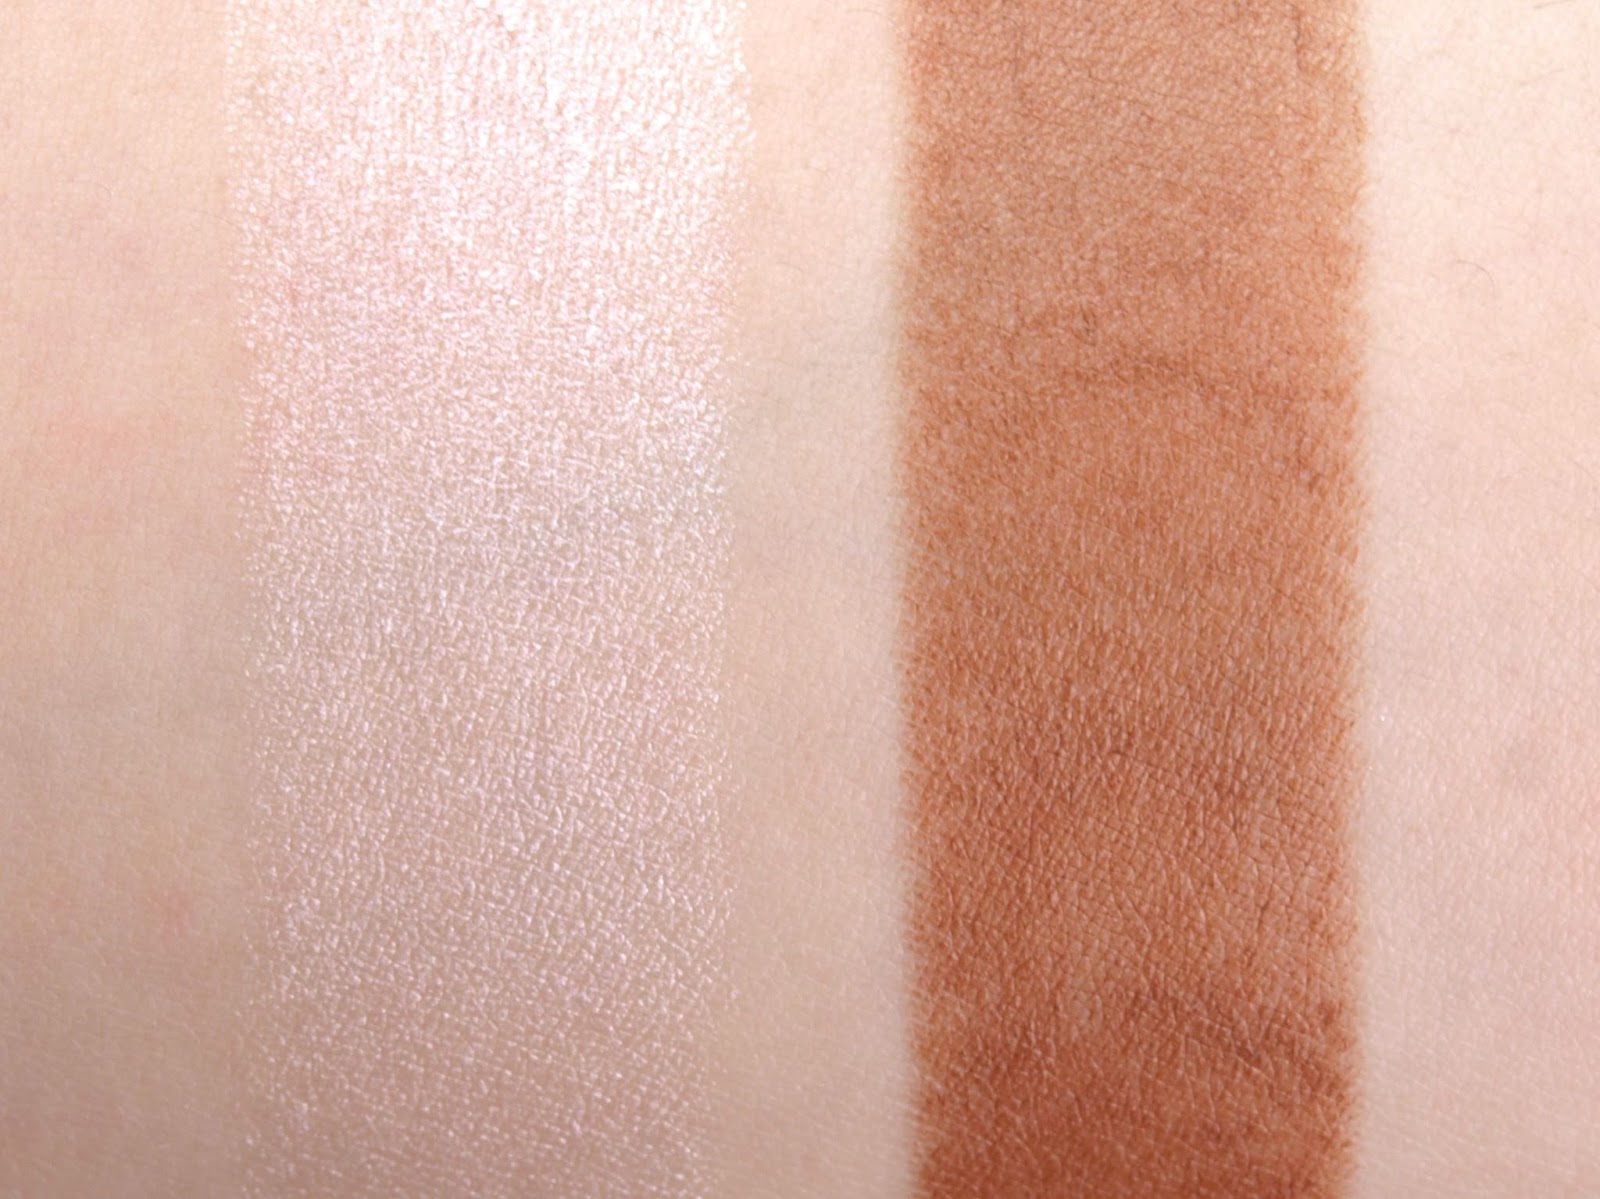 Clinique Chubby Sculpting Sculpting Highlight: Review and Swatches The Happy Sloths: Beauty, Makeup, and Skincare Blog with Reviews and Swatches